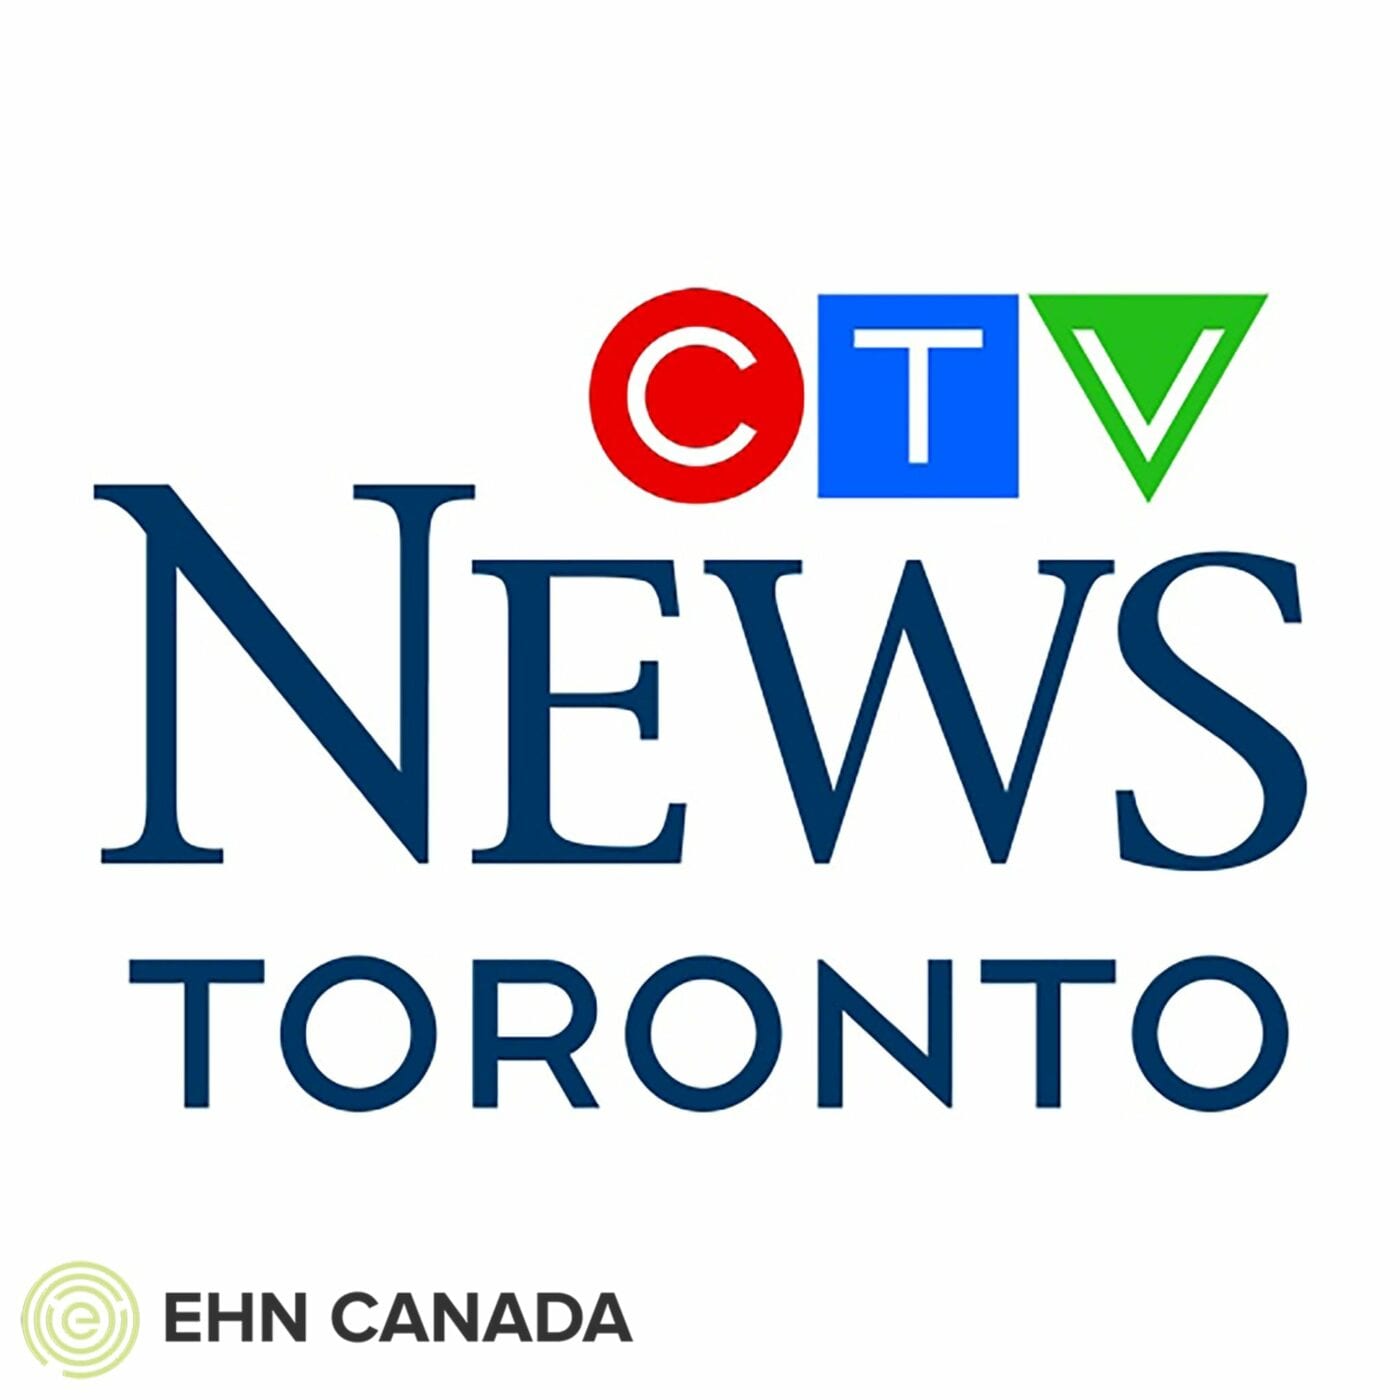 CTV News—Mental Health Services in High Demand During COVID